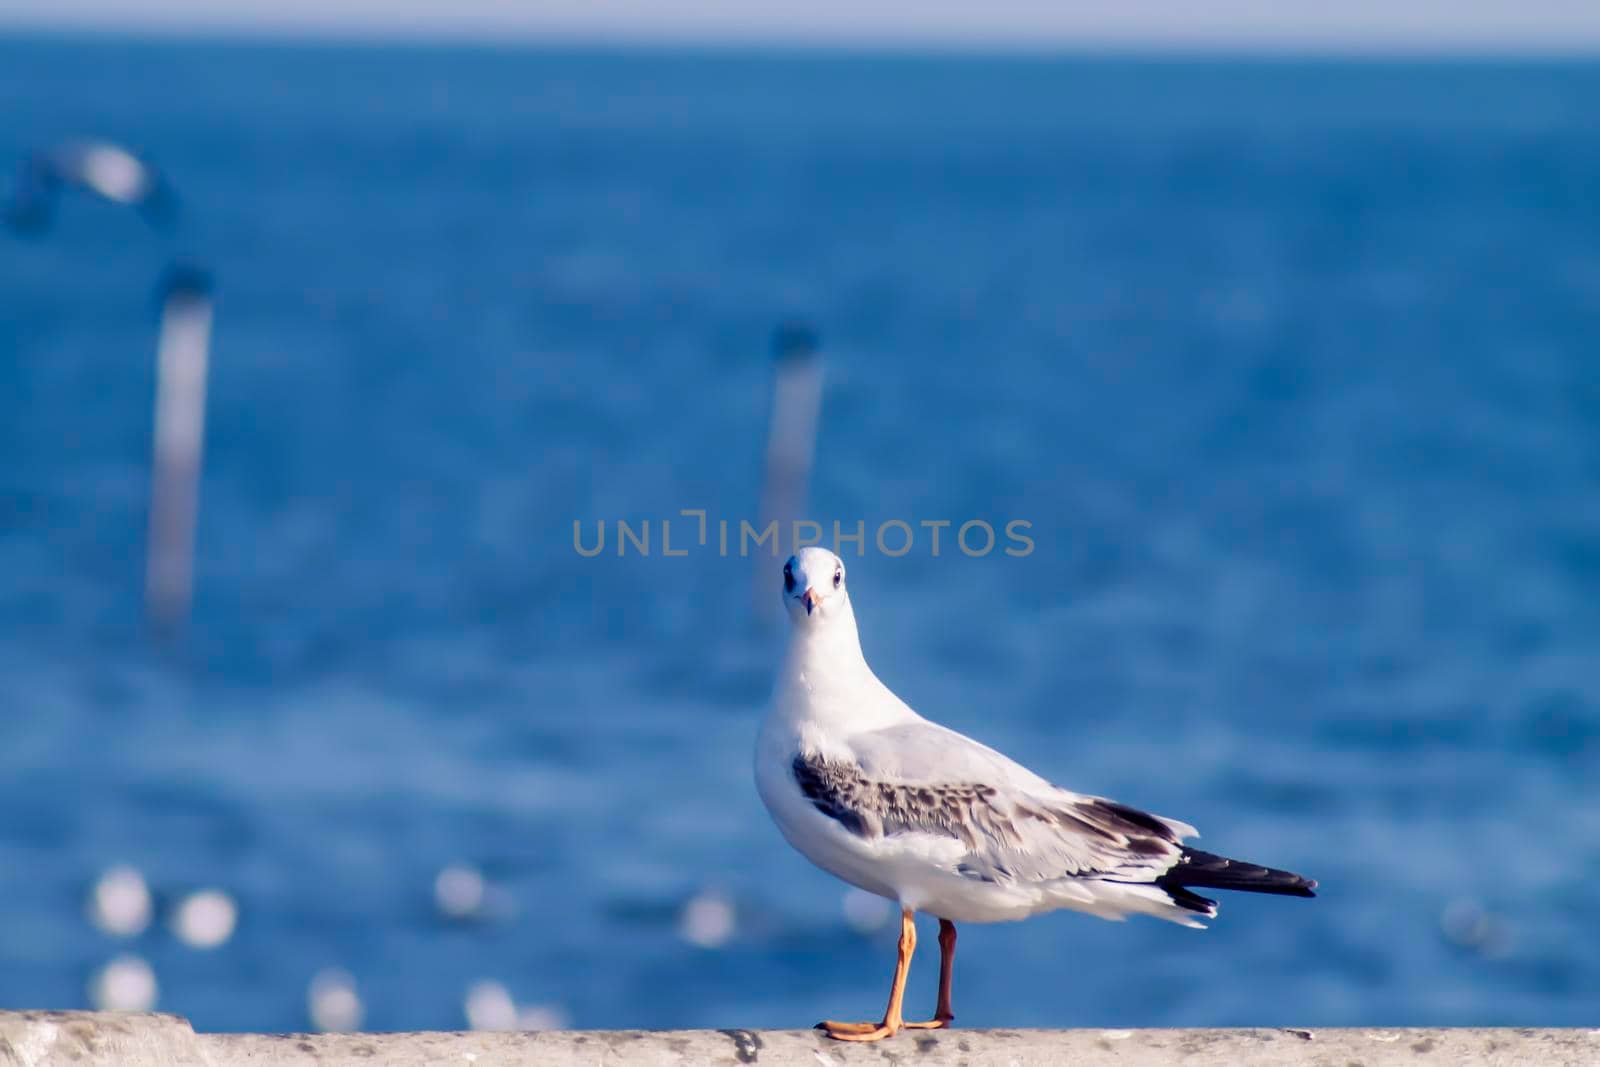 Seagull portrait animal wildlife over blur blue sea nature background by Petrichor